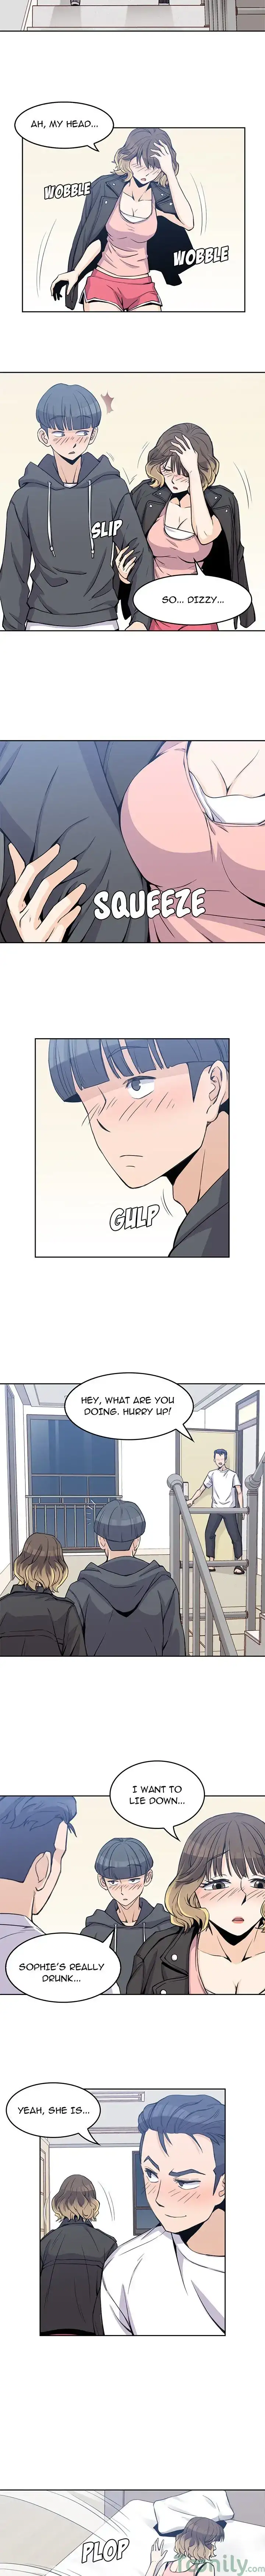 Boys are Boys - Chapter 2 Page 8